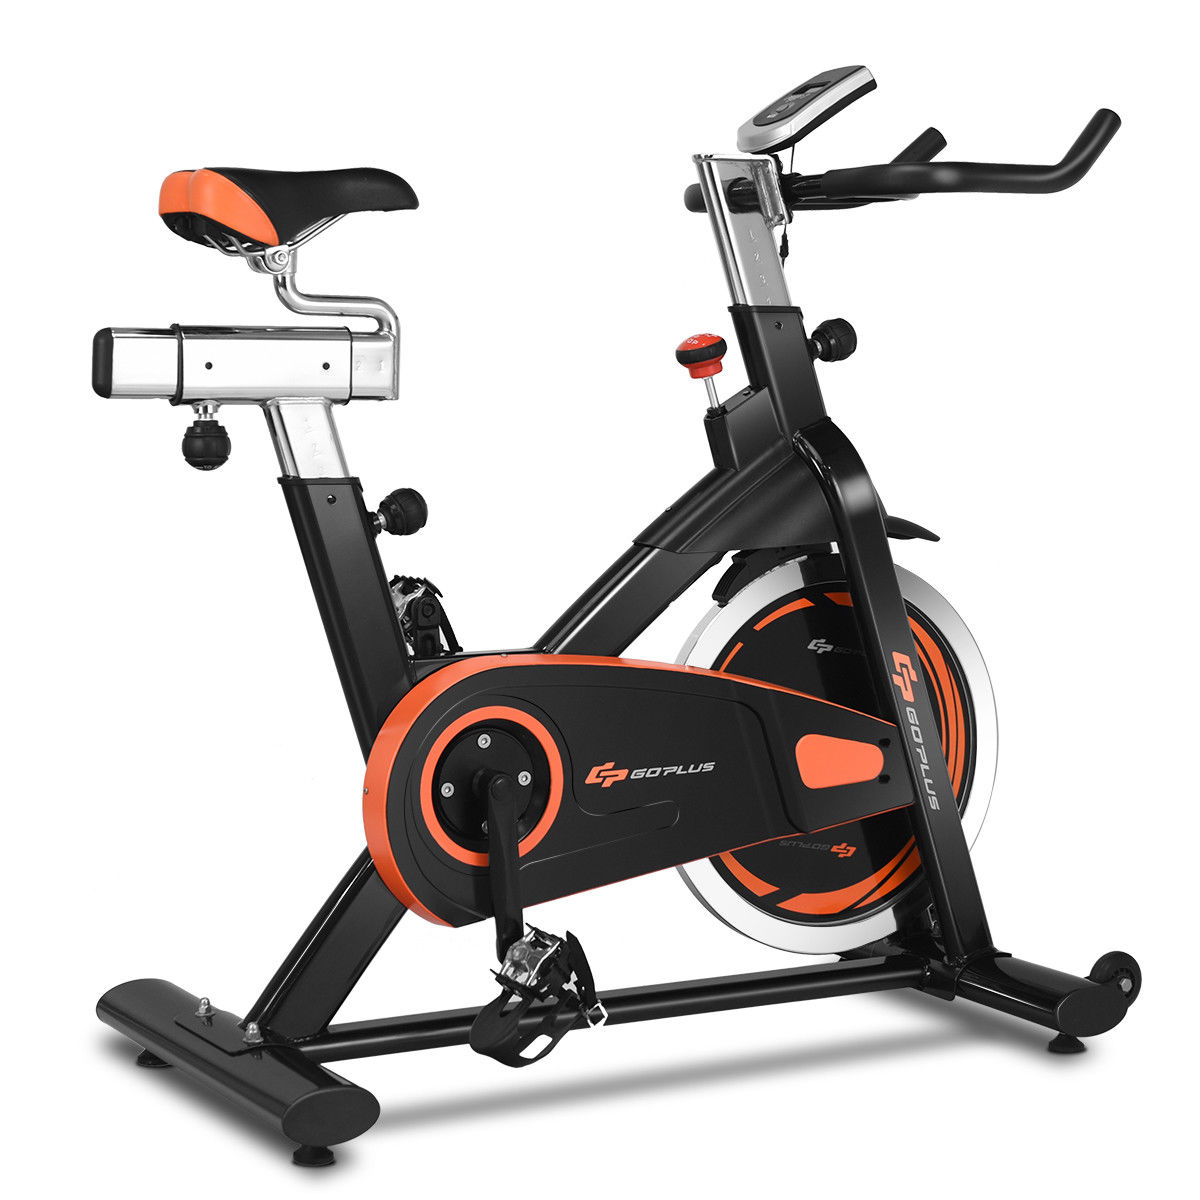 Goplus SP36126 Indoor Cycling Stationary Exercise Bike